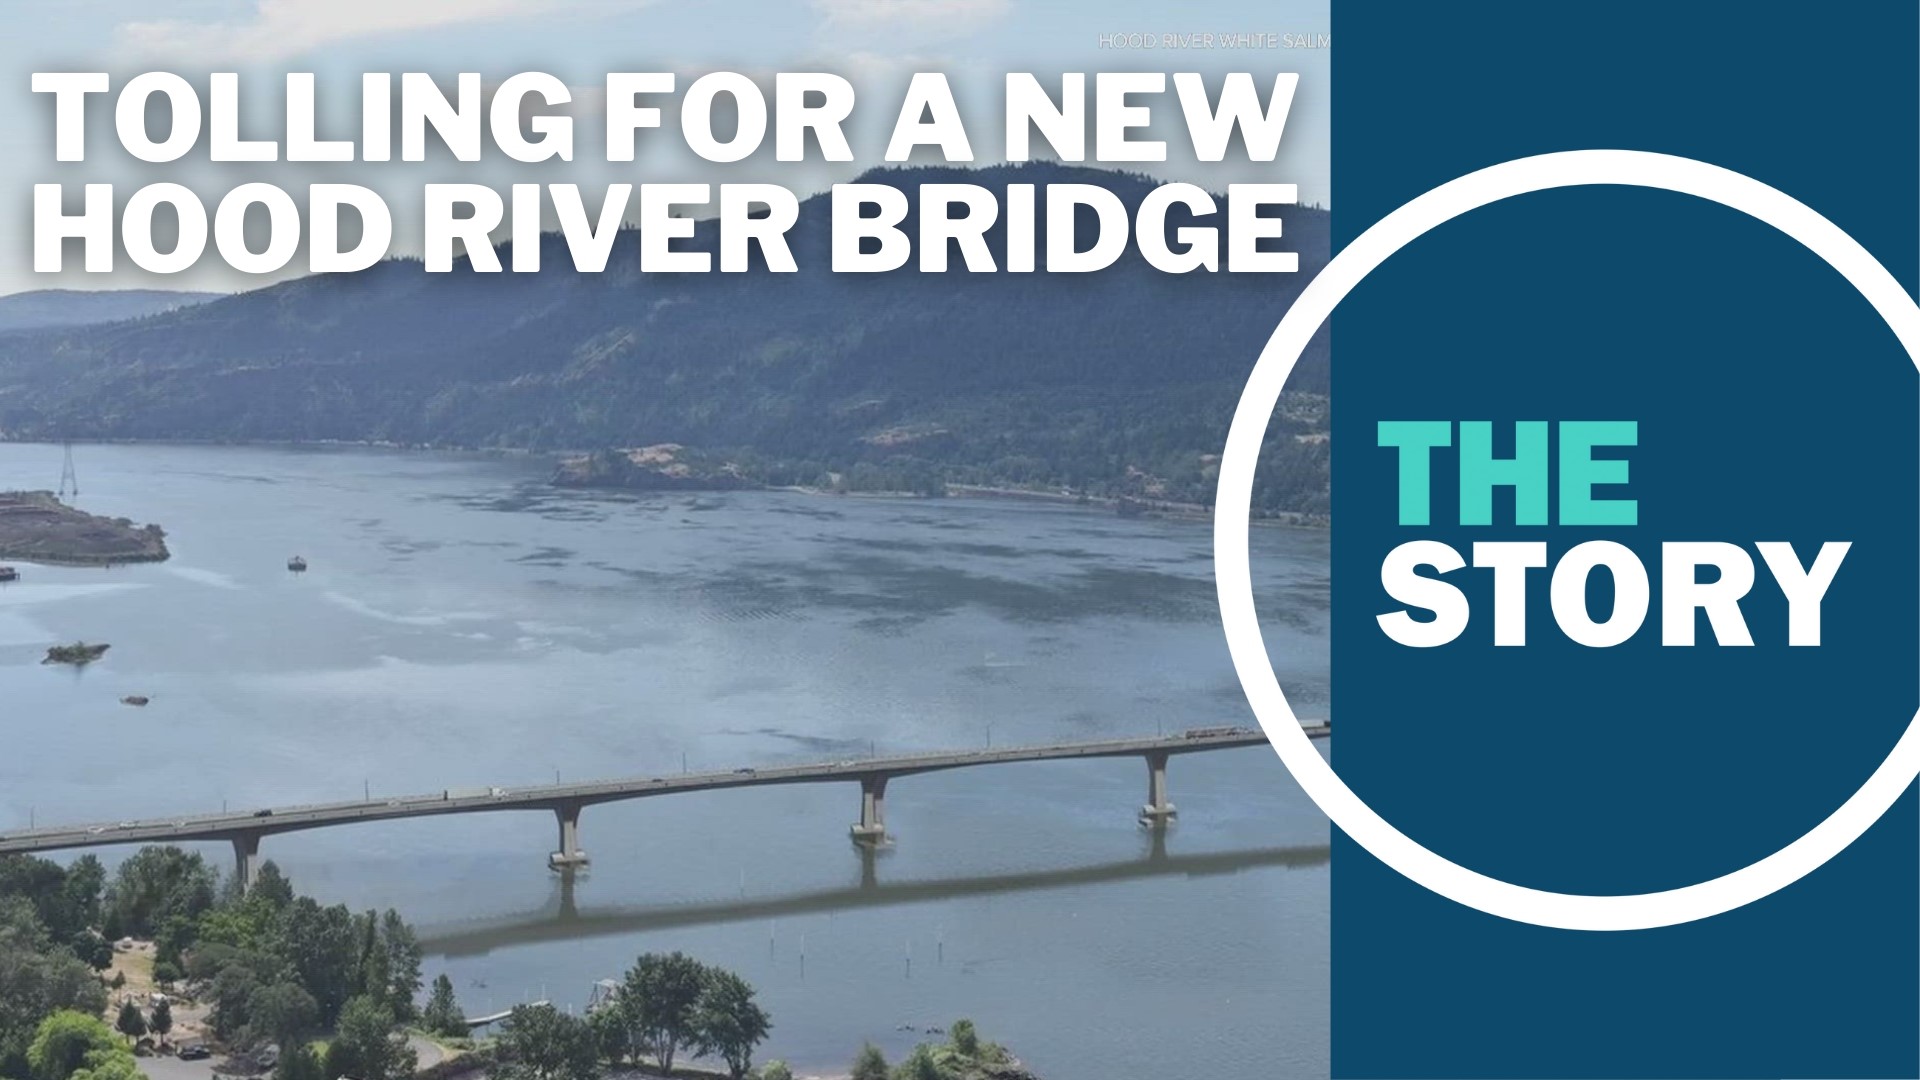 The major toll increase on the century-old bridge comes a little over two years ahead of when officials hope to begin construction on its replacement.